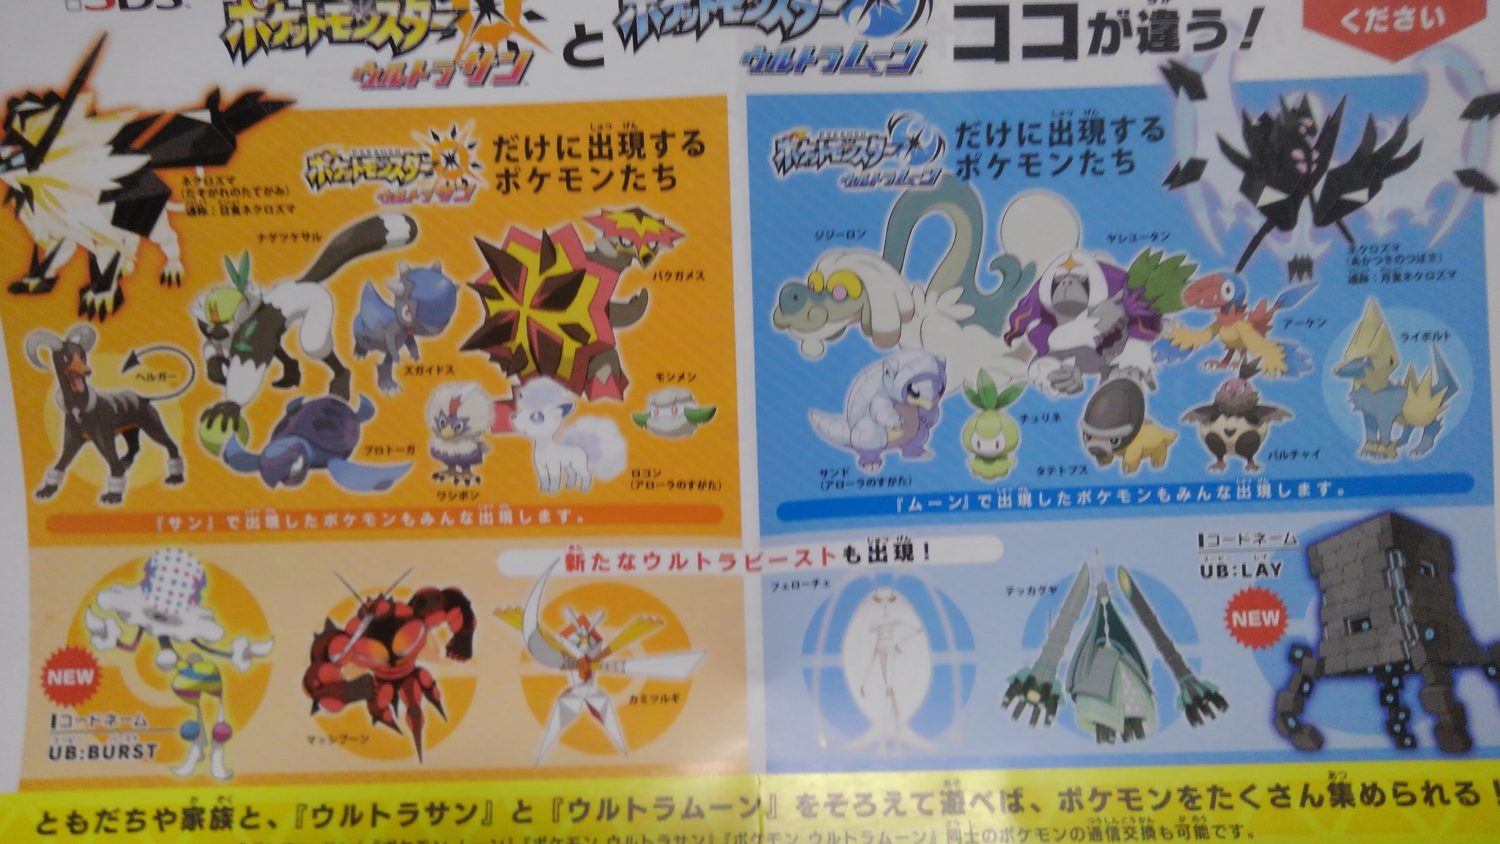 Differences between original sun/moon and ultra sun/moon? : r/3DS